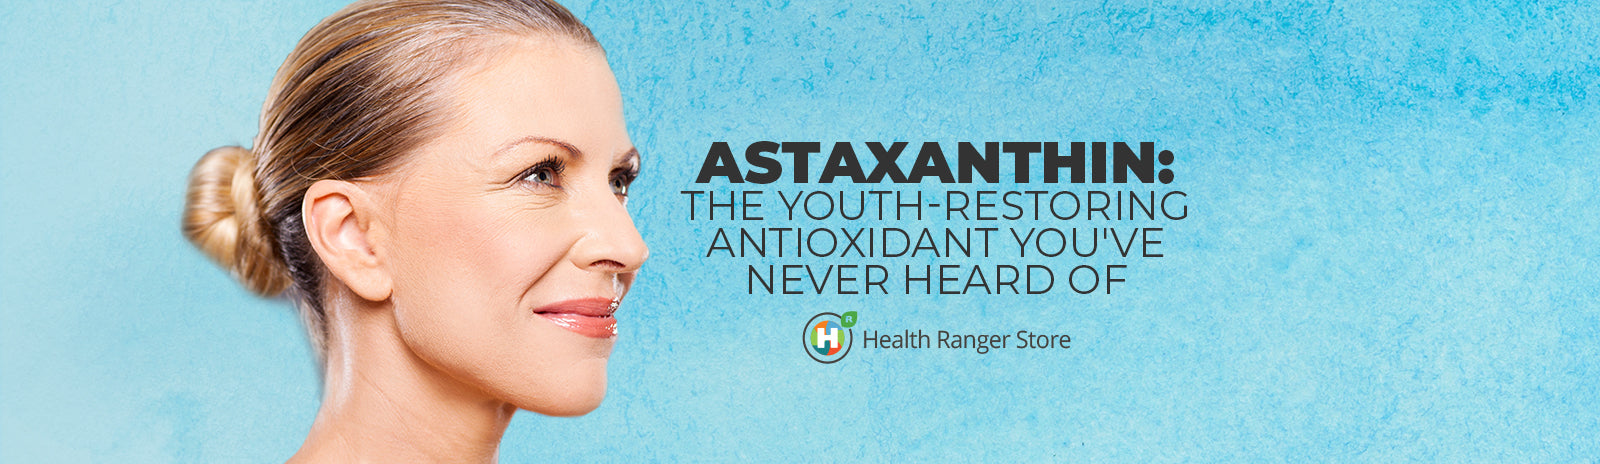 Astaxanthin: The youth-restoring antioxidant you've never heard of